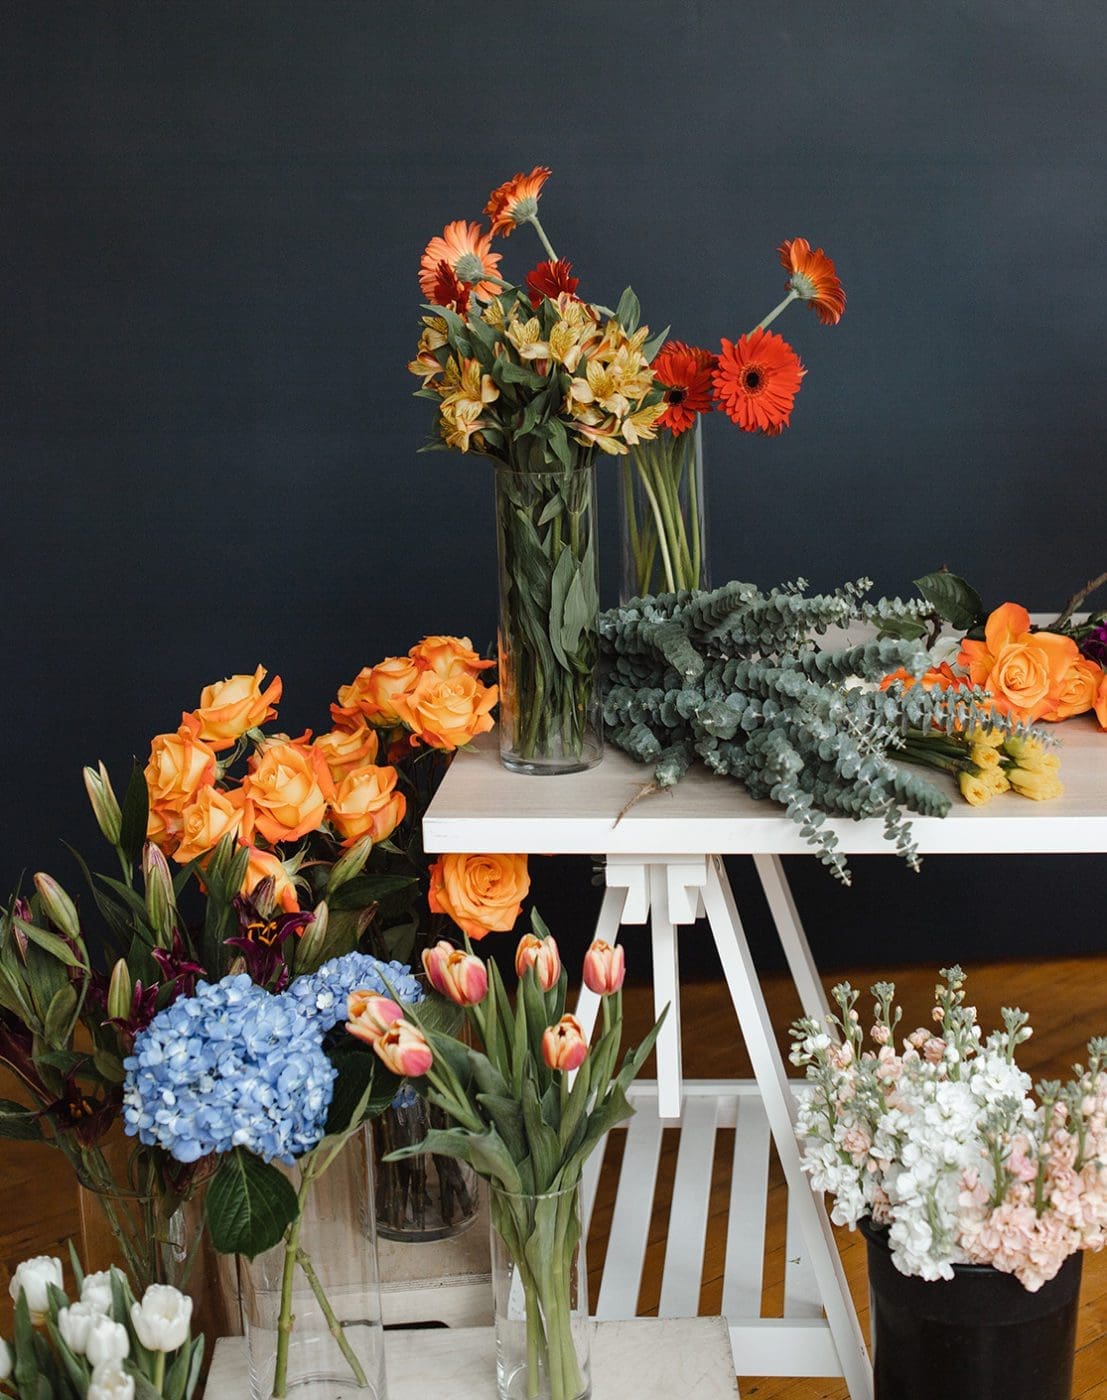 Floral designer table with various bouquets in vases.